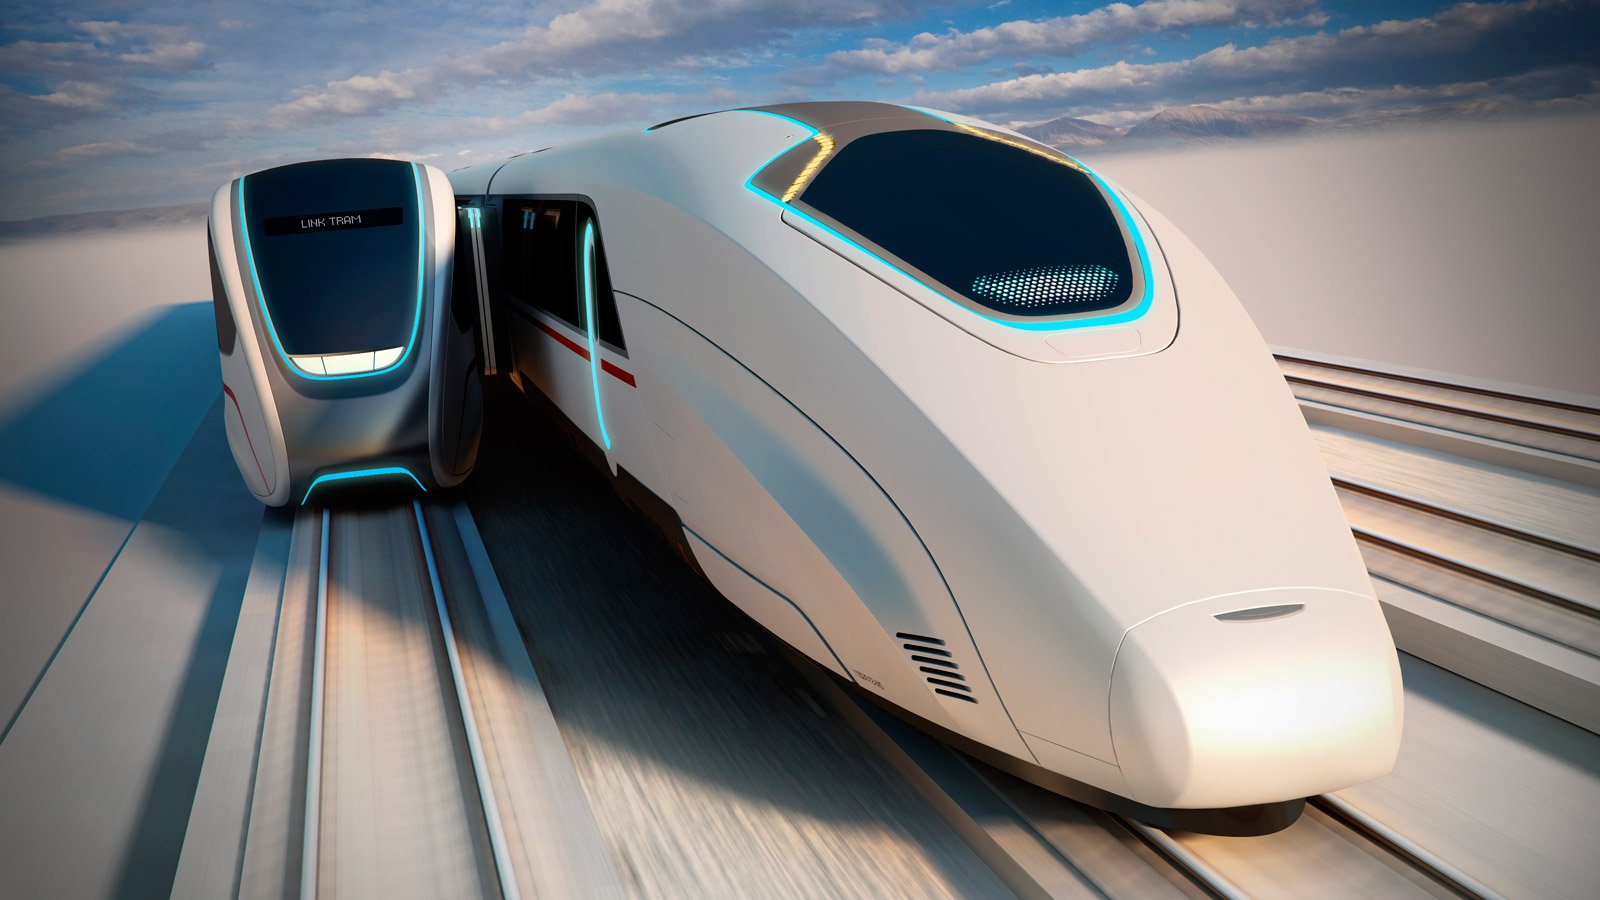 This High Speed Train Picks Up Passengers Without Having To Stop. Innovation. Smithsonian Magazine